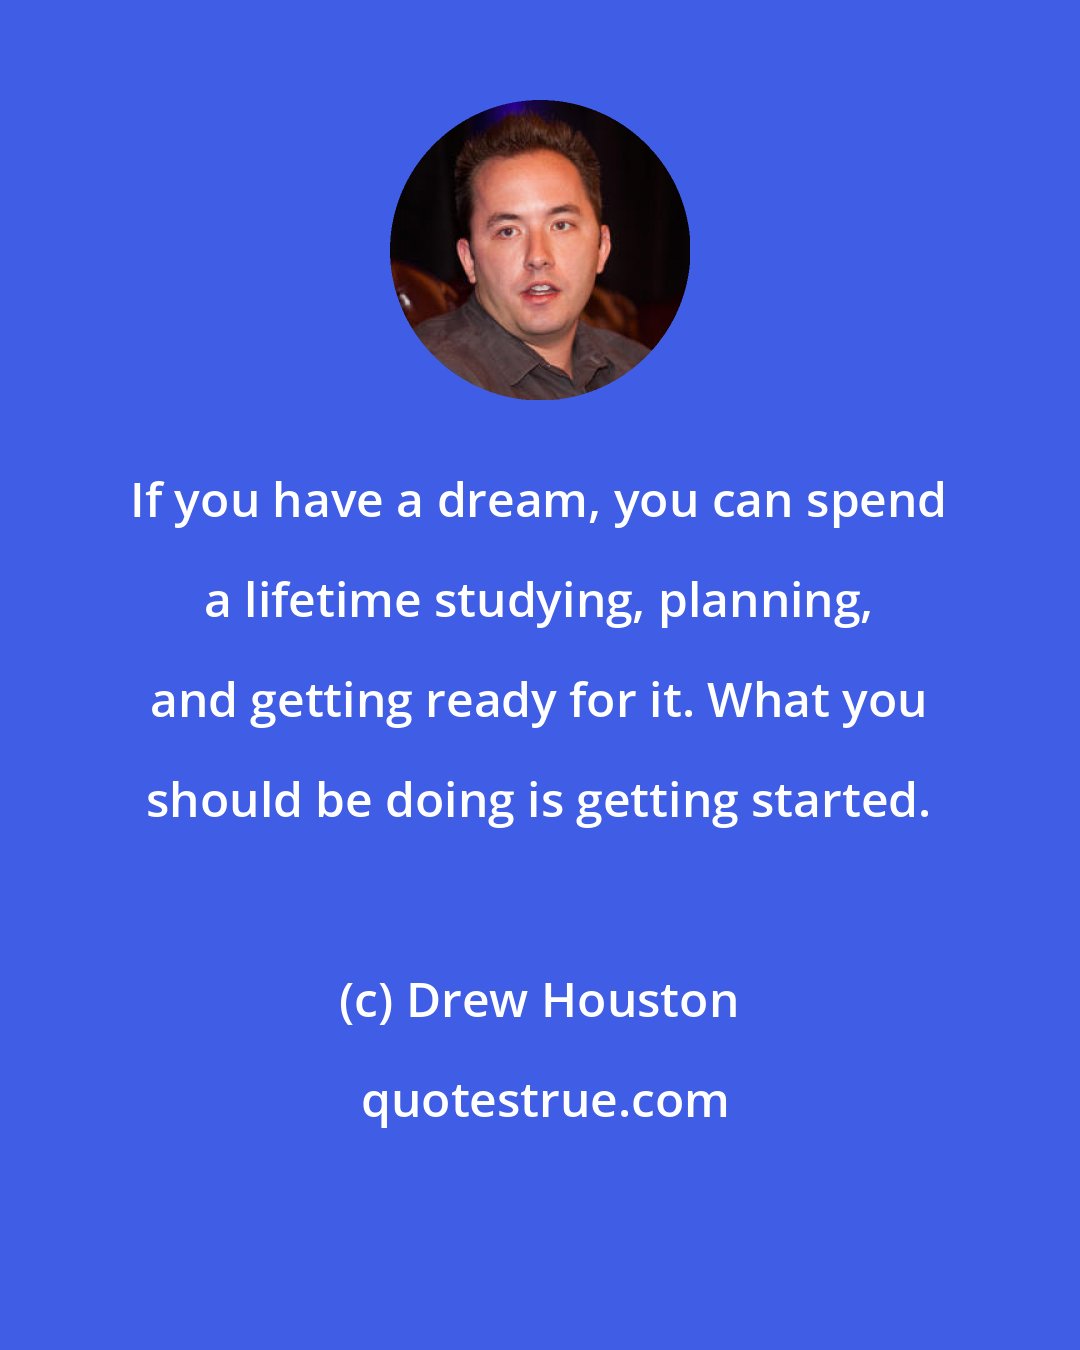 Drew Houston: If you have a dream, you can spend a lifetime studying, planning, and getting ready for it. What you should be doing is getting started.